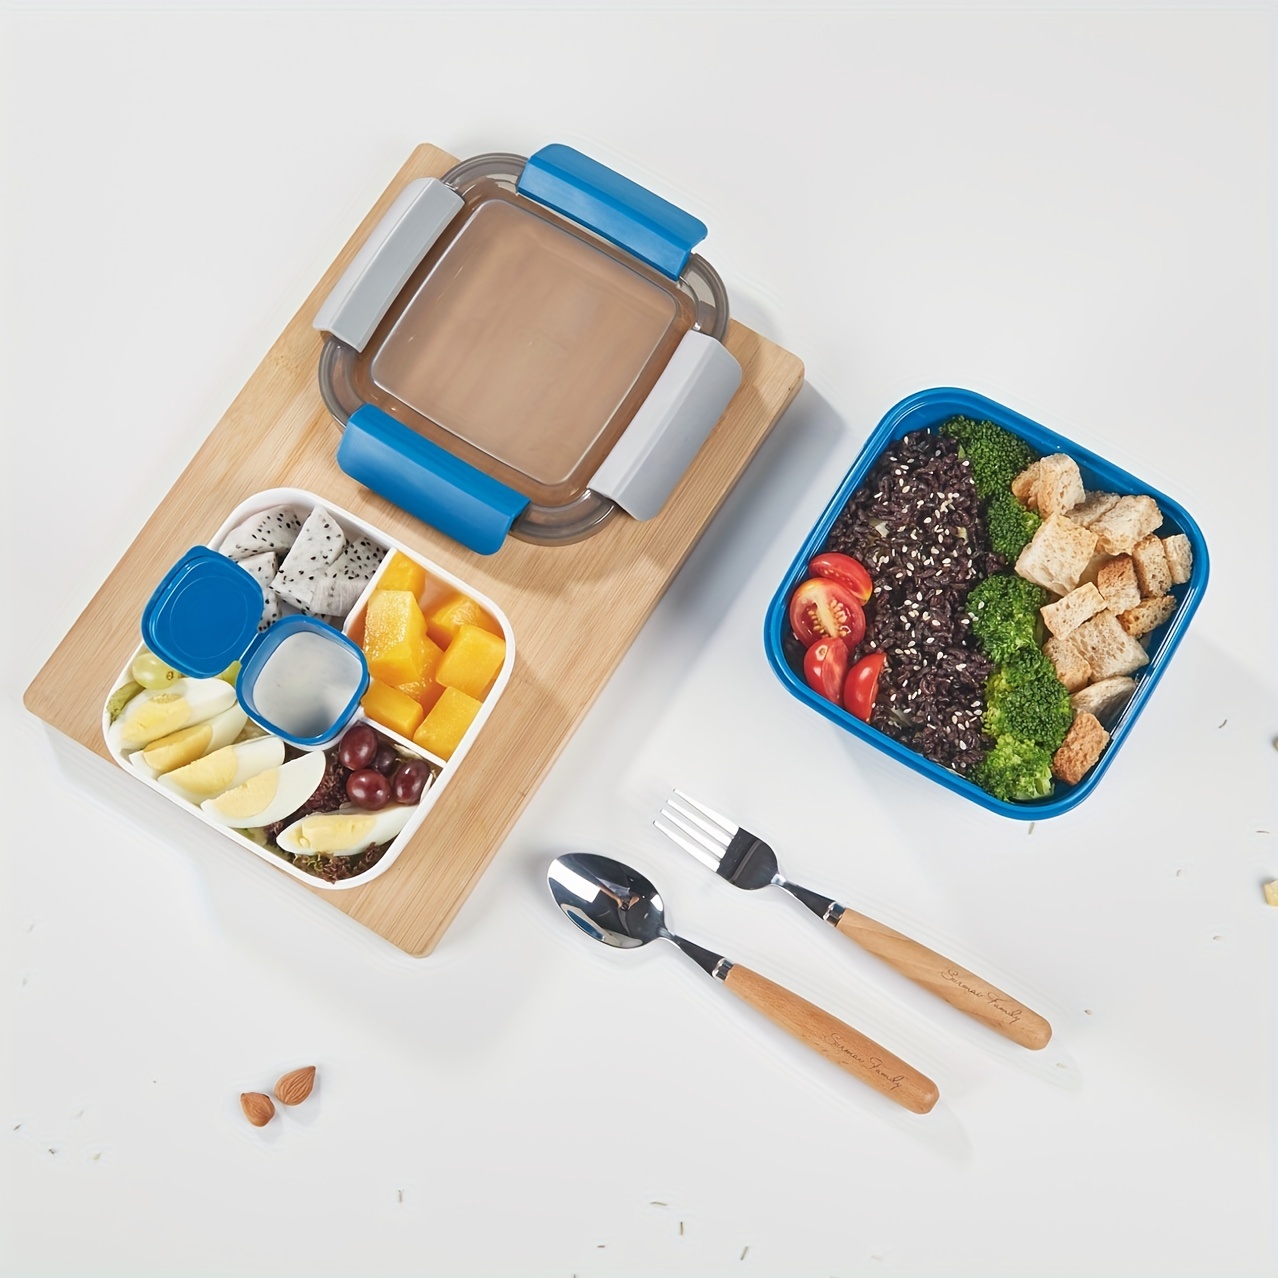 Salad Lunch Containers To Go, Salad Bowls with 3 Compartments